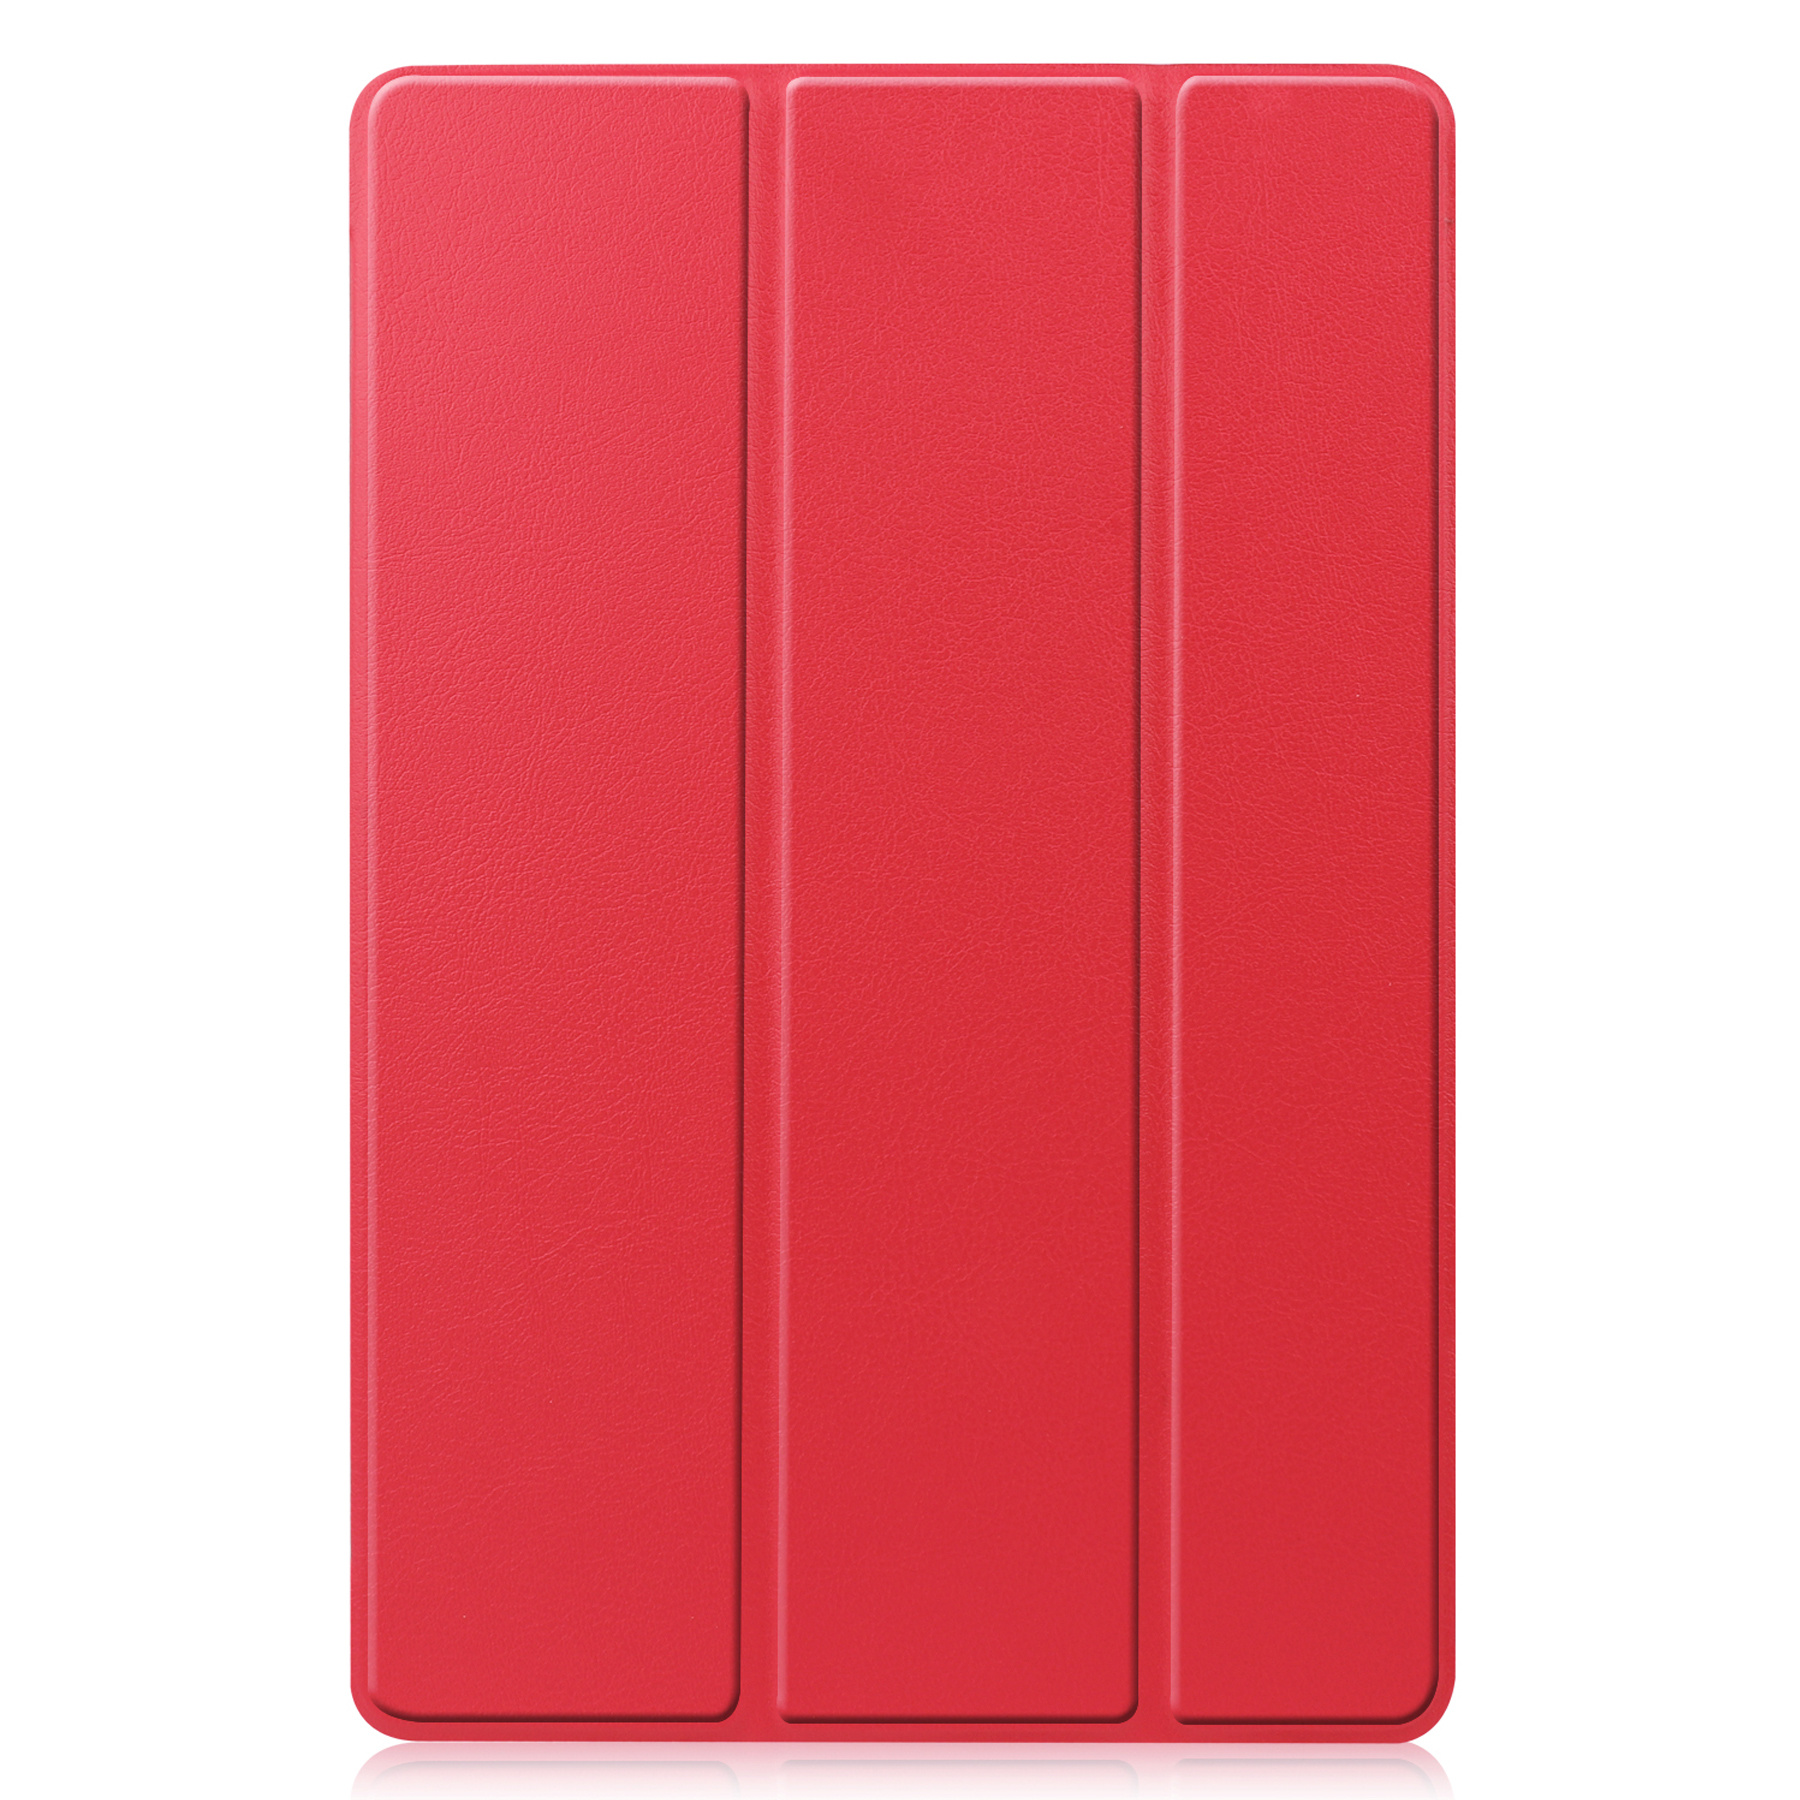 BASEY. Samsung Galaxy Tab S8 Plus Hoes Case Met S Pen Uitsparing - Samsung Galaxy Tab S8 Plus Hoesje Rood - Samsung Tab S8 Plus Book Case Cover